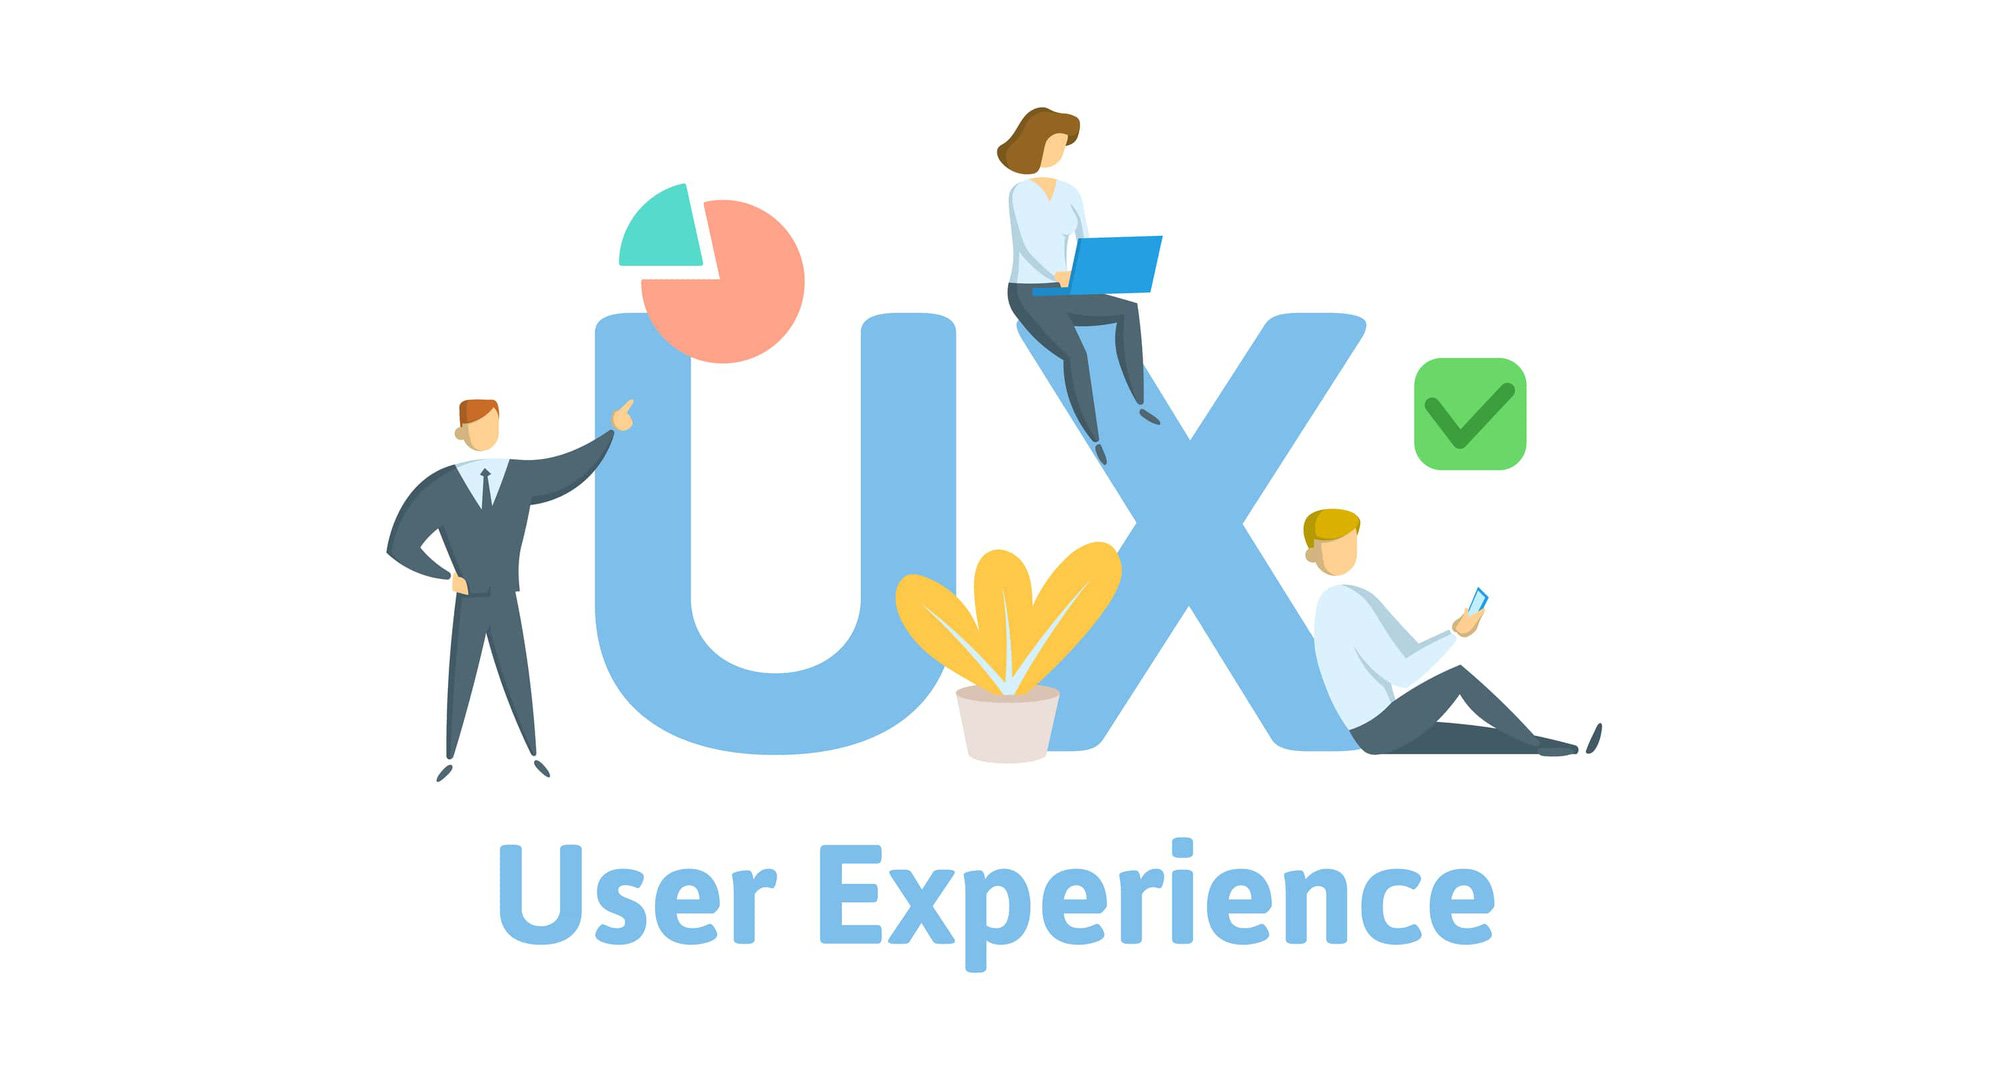 User Experience (UX)
